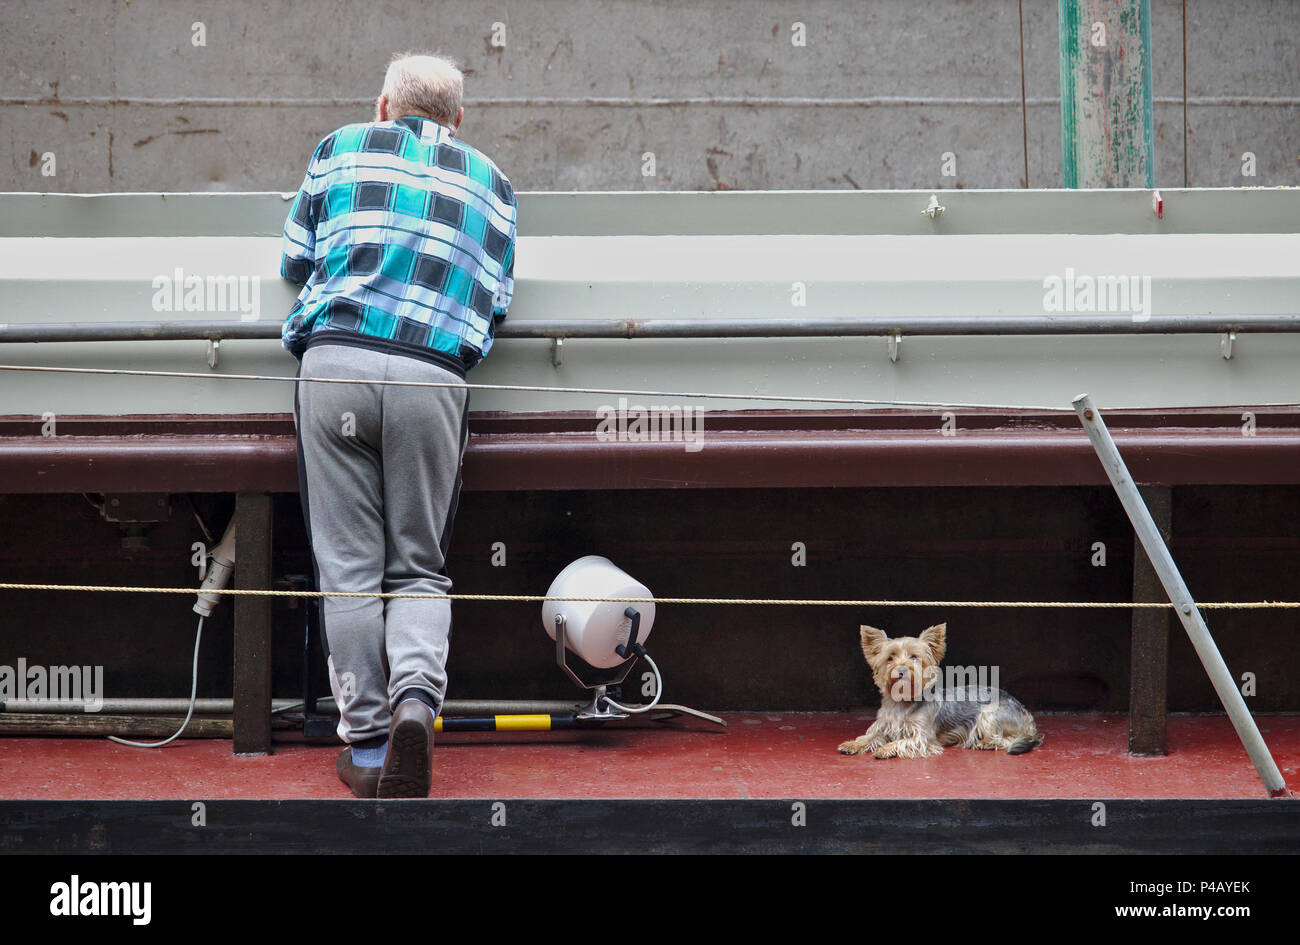 Bremen, Germany - June 19th, 2018 - Old man in checkered shirt leaning on a handrail with his back towards the camera with his little dog at his feet Stock Photo